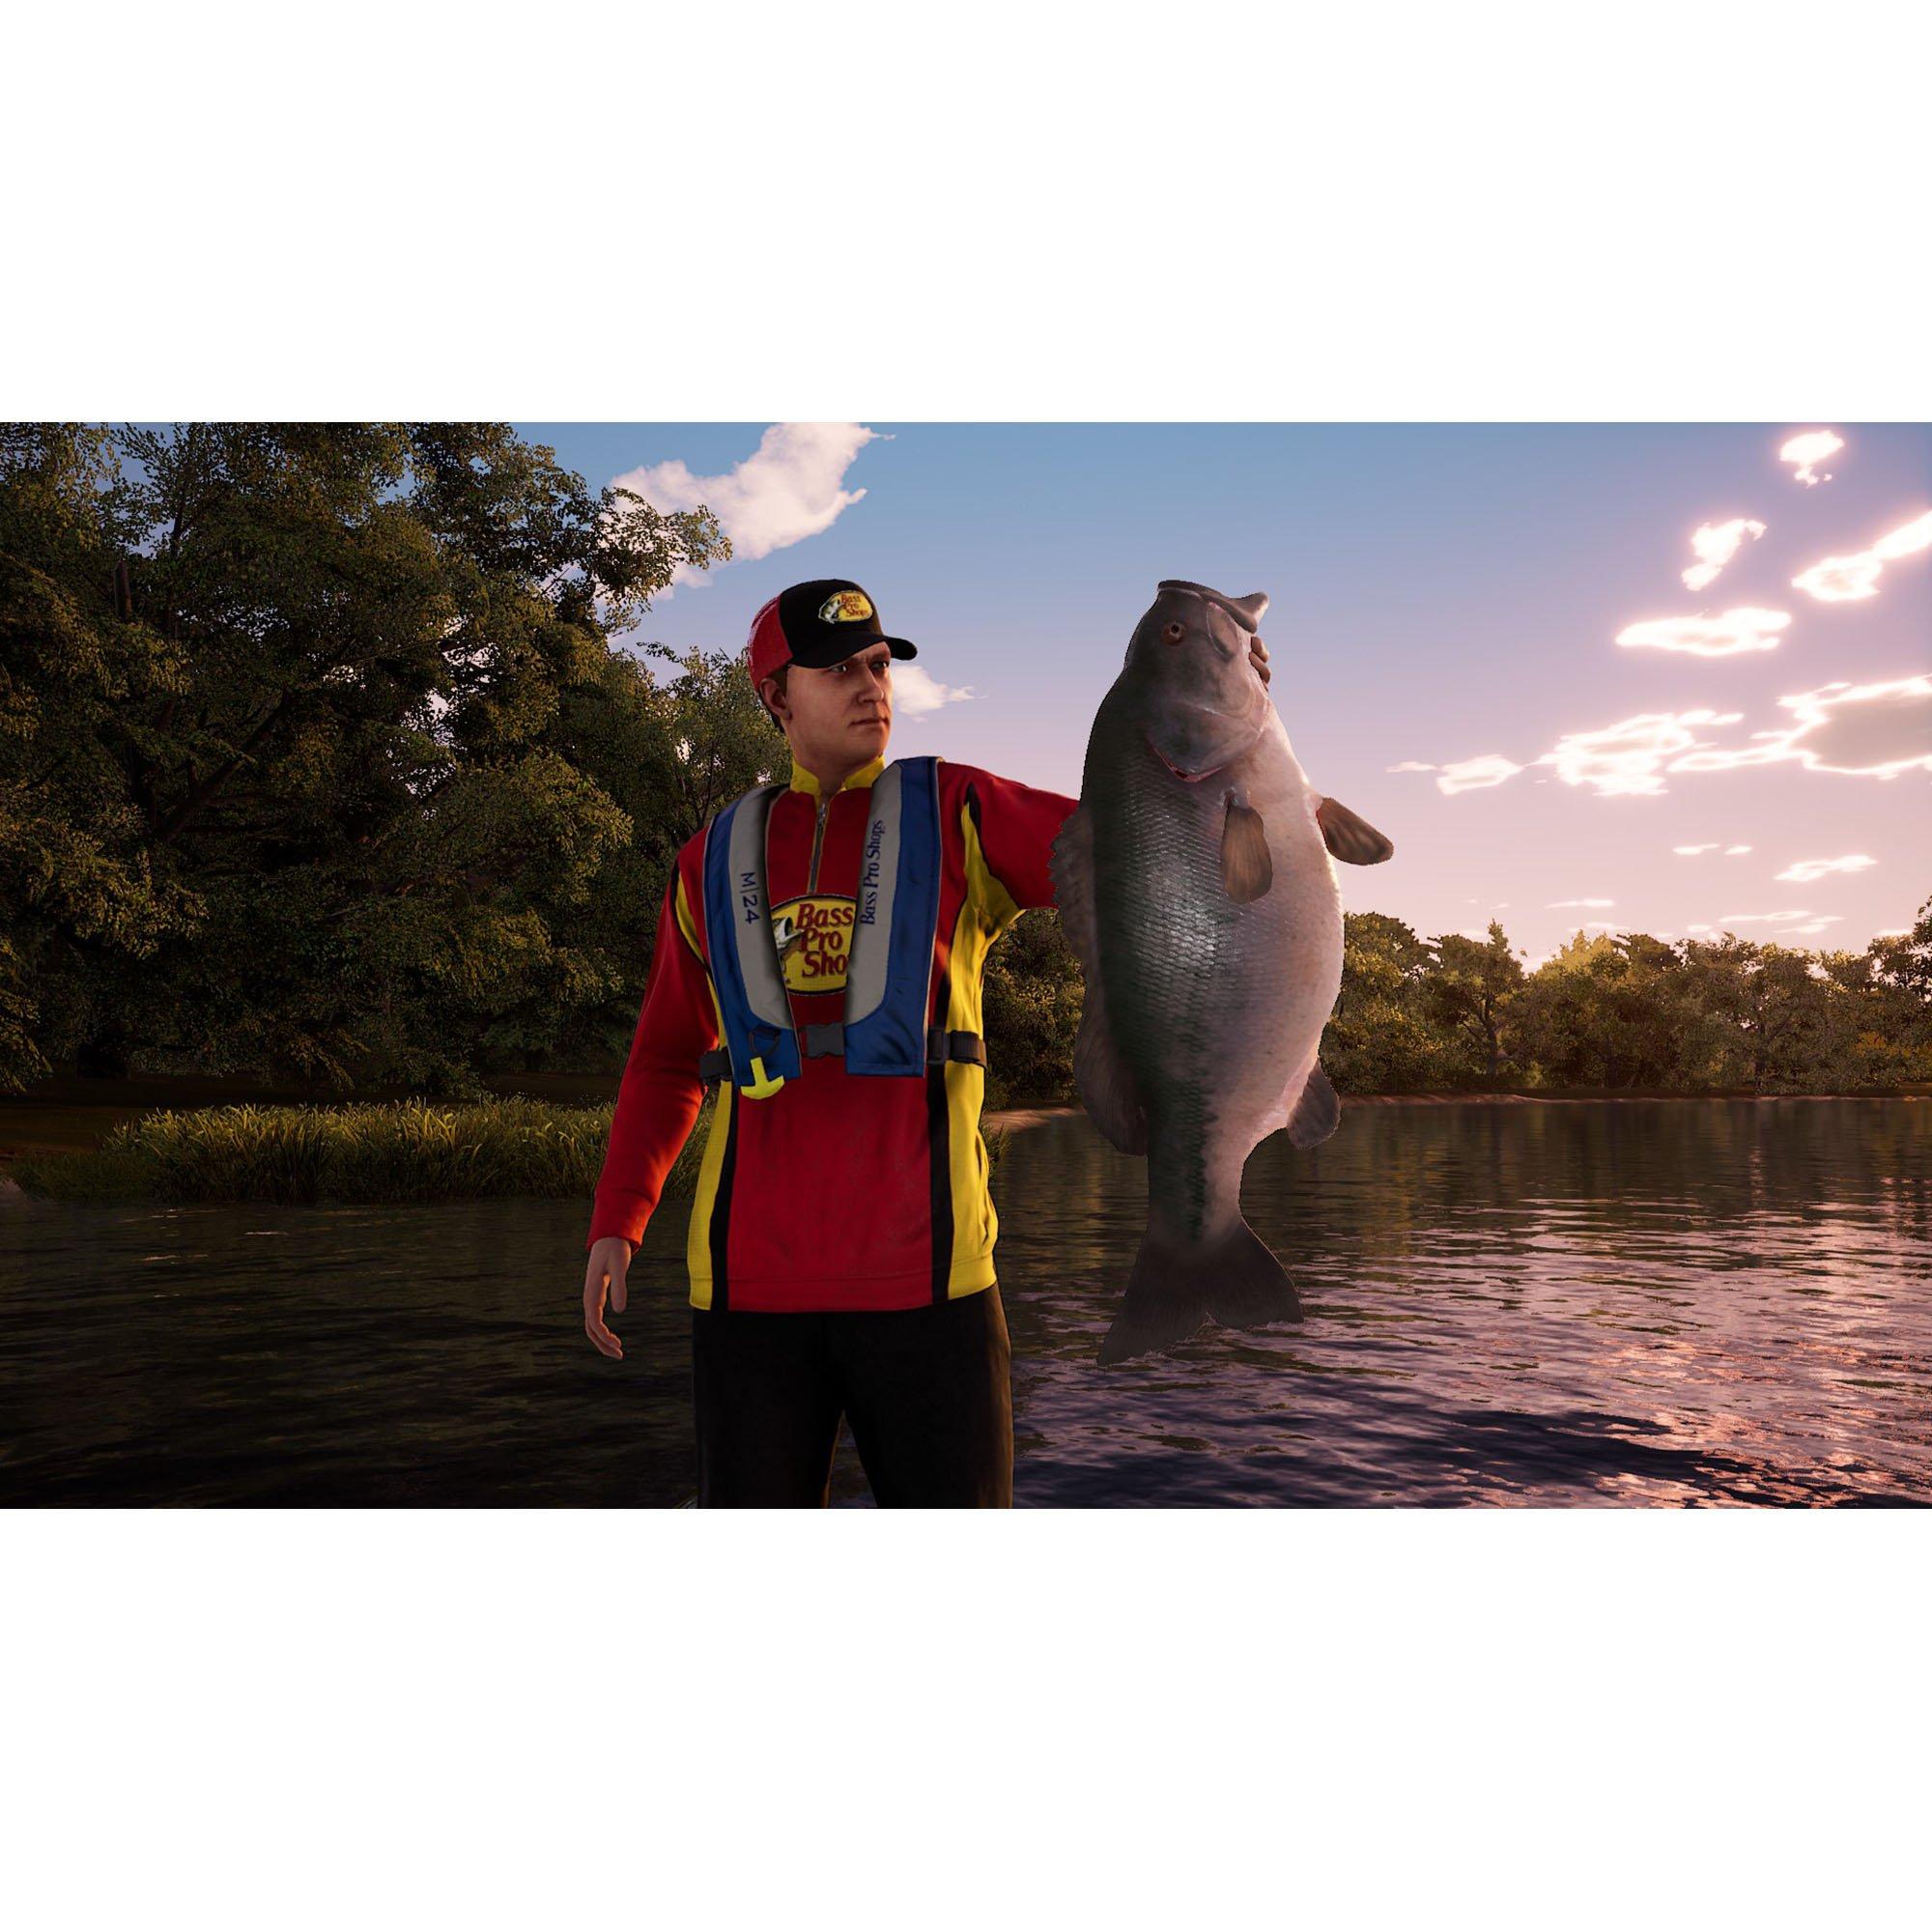 Fishing Sim World: Bass Pro Shops Edition Trophies - View all 26